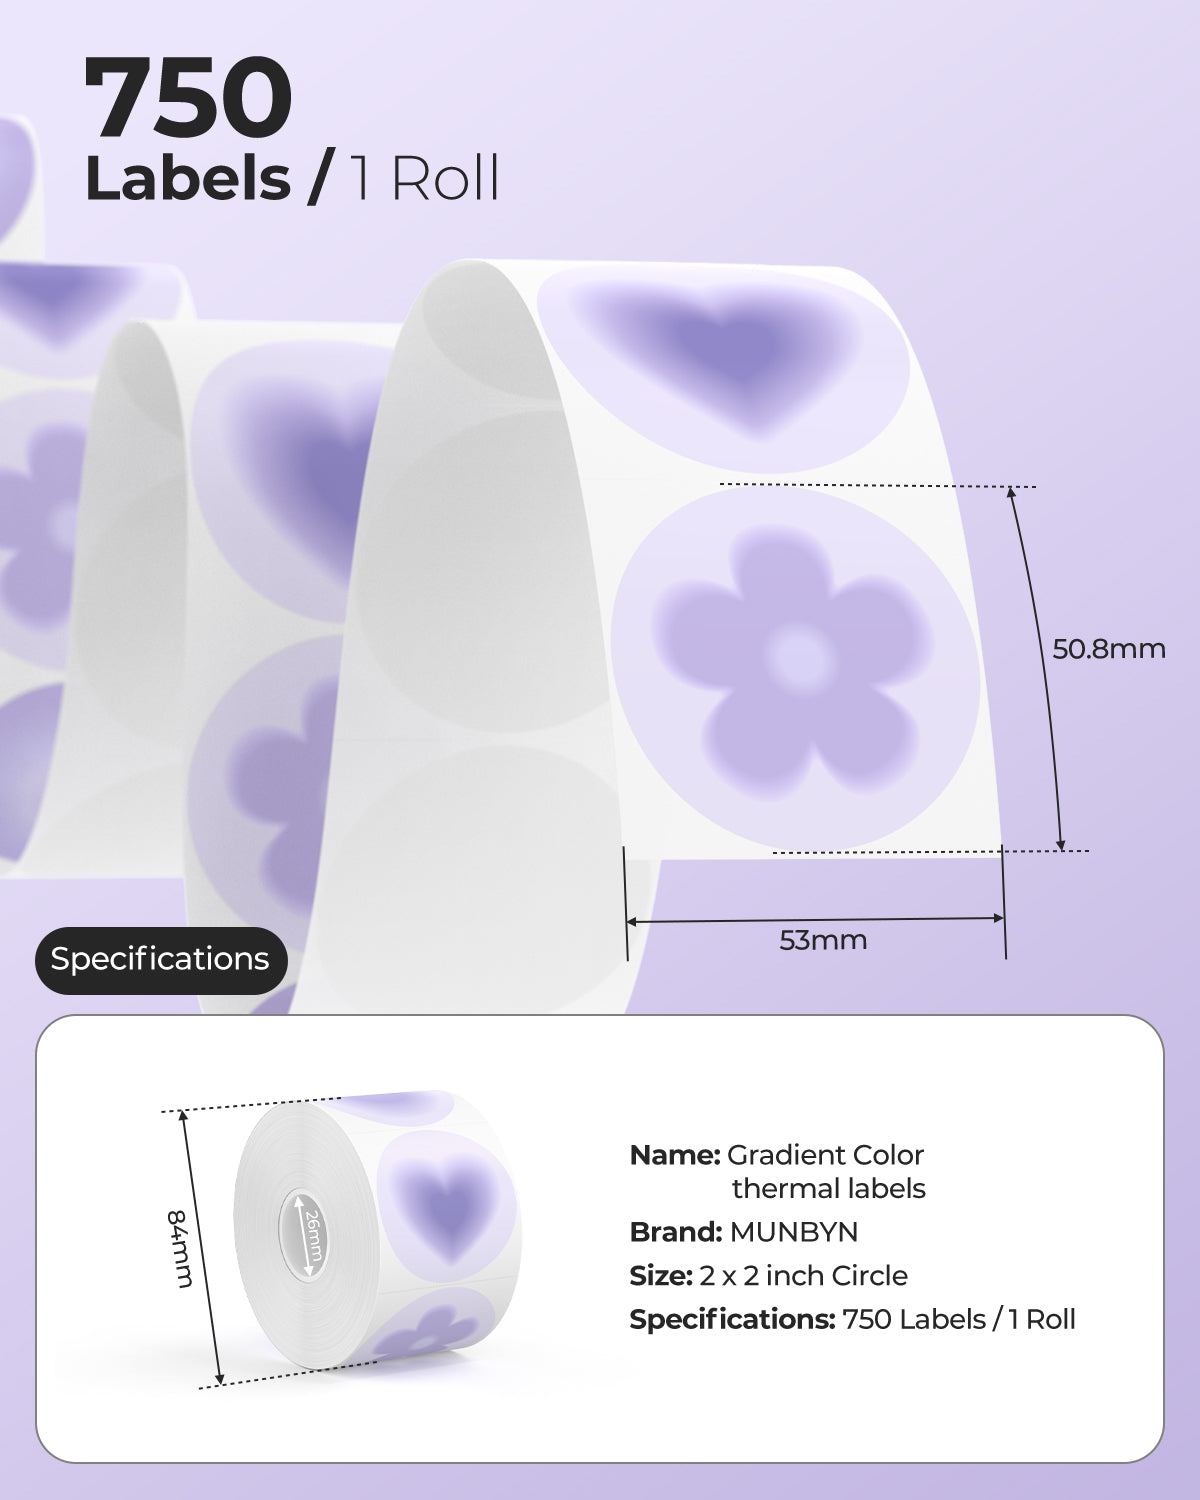 With 750 labels per roll and a versatile 2-inch diameter, these labels are perfect for a wide range of applications.